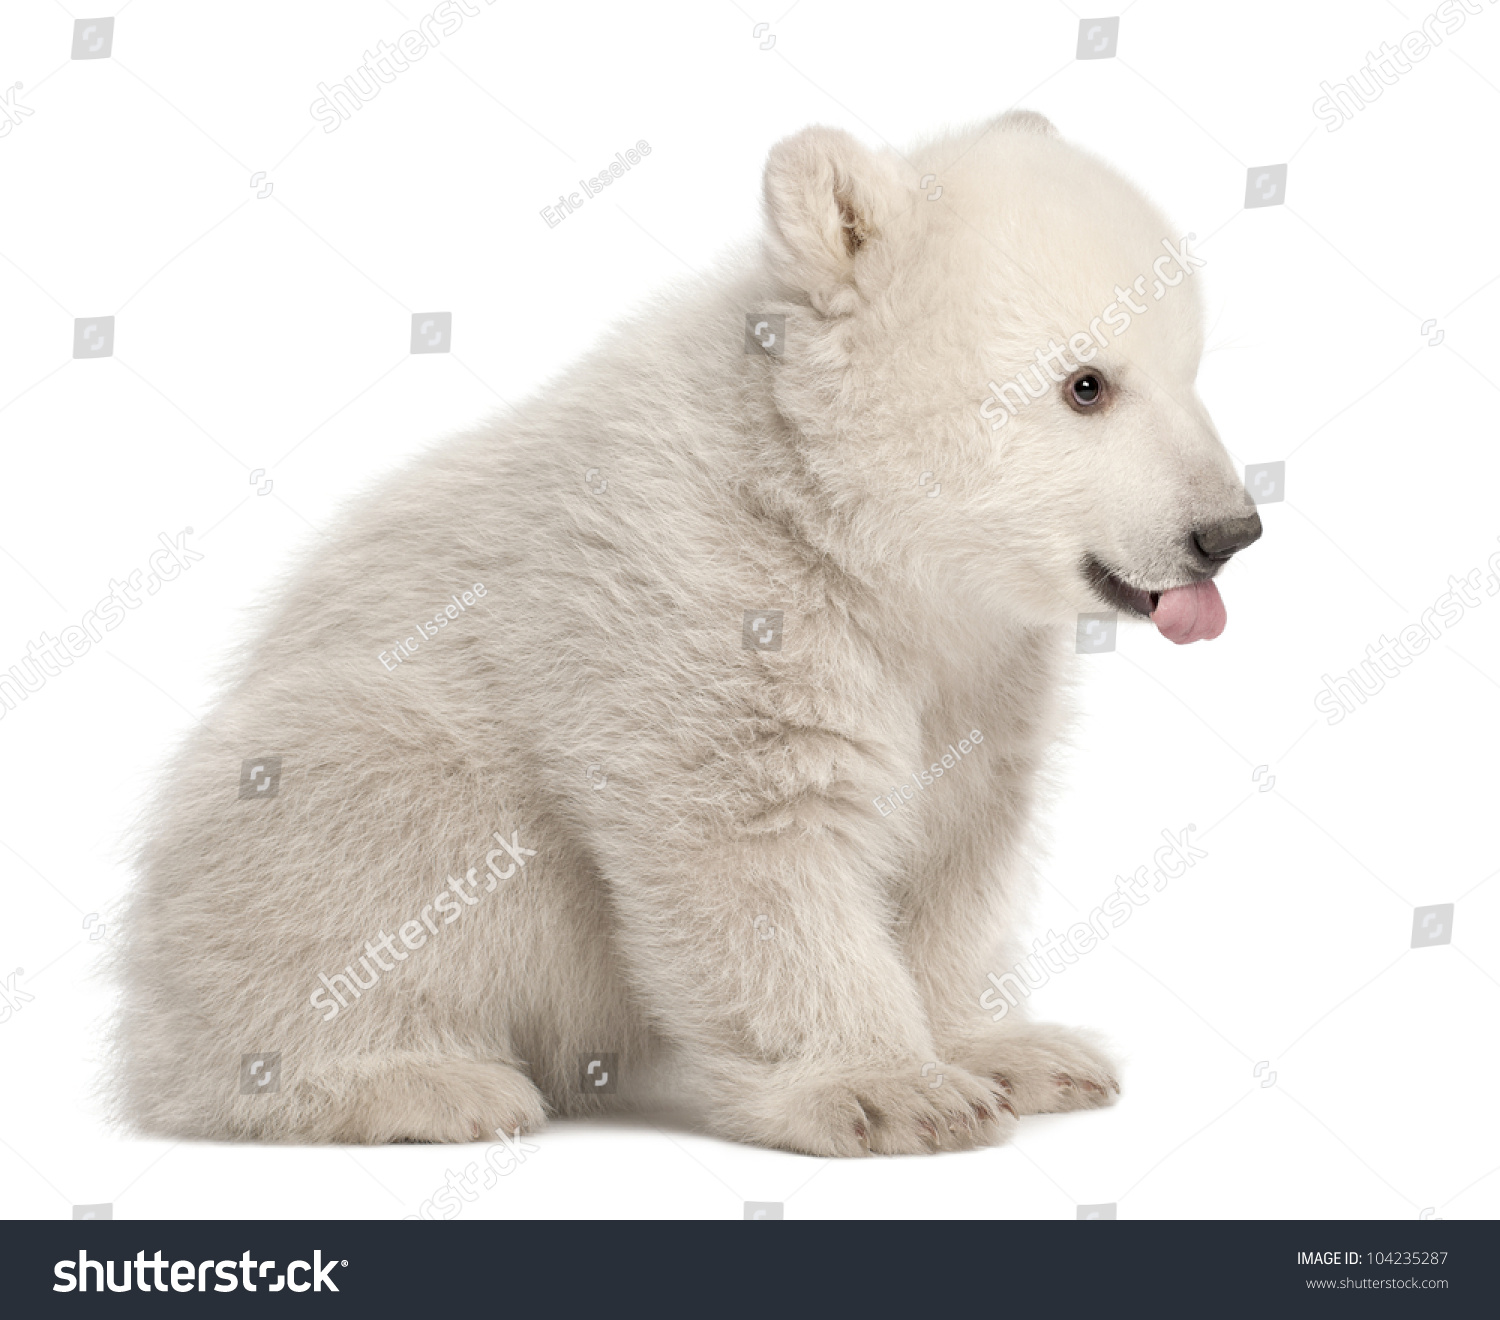 Mojo Polar Bear Cub Sitting 387021 With Tags for sale online 